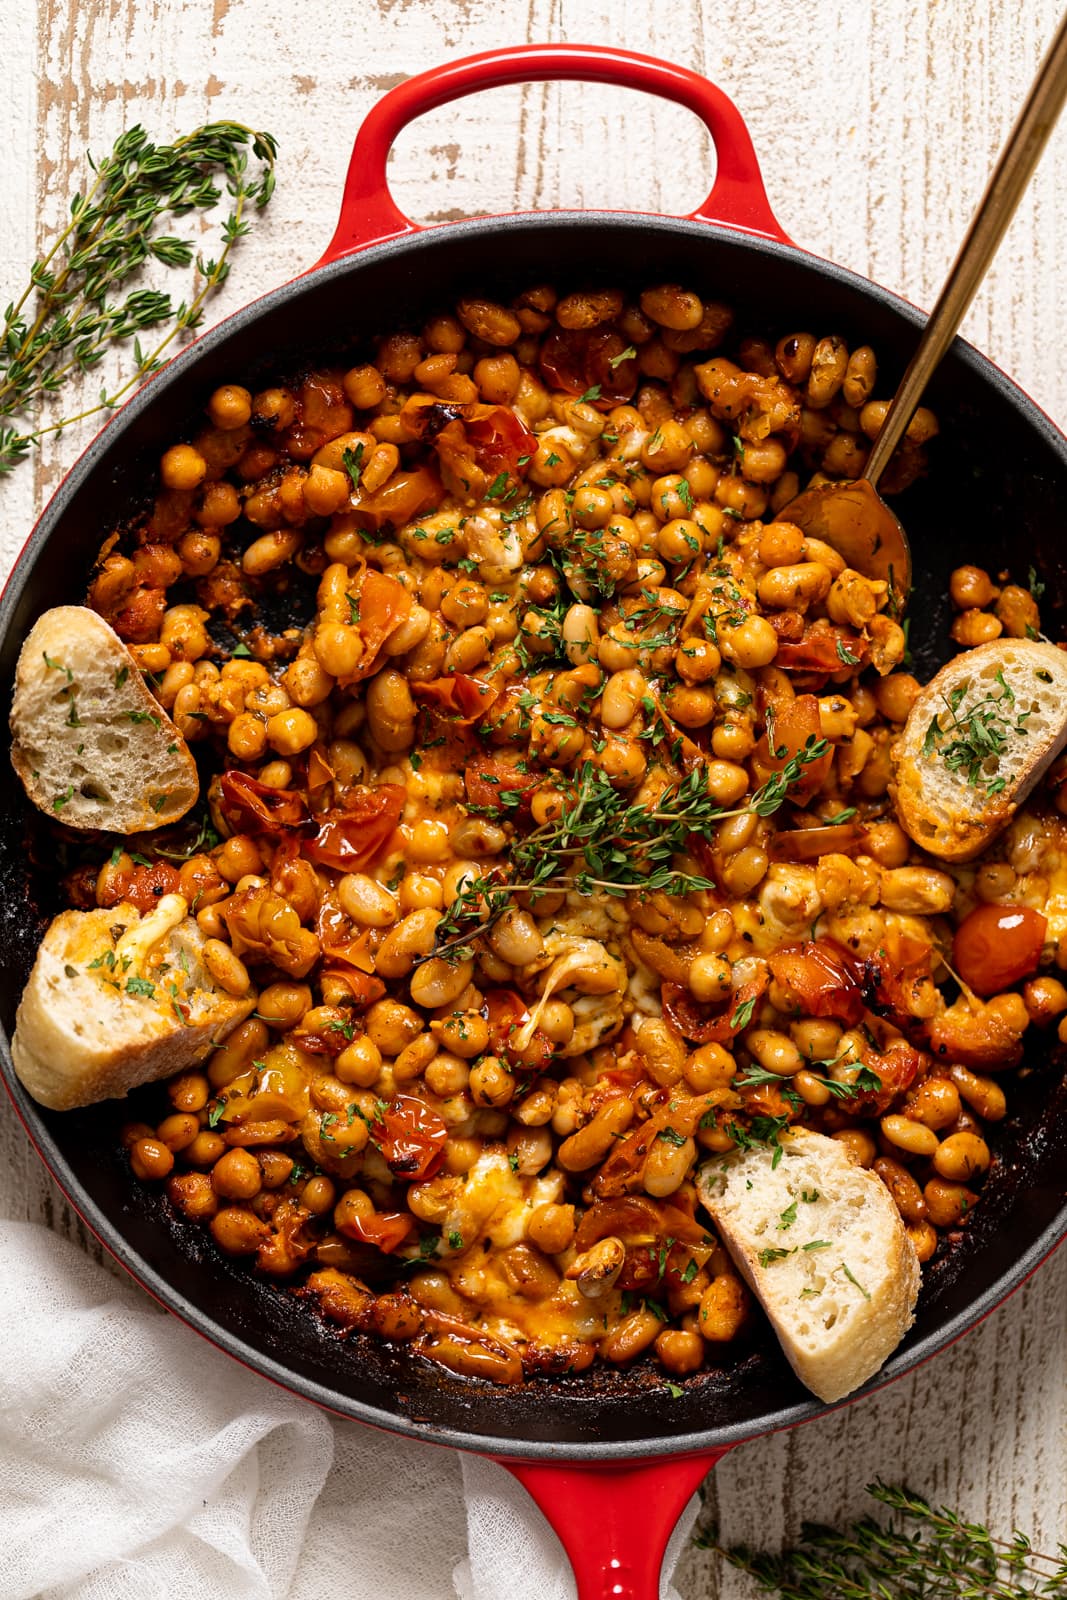 Skillet of Saucy Baked Chickpea and White Beans